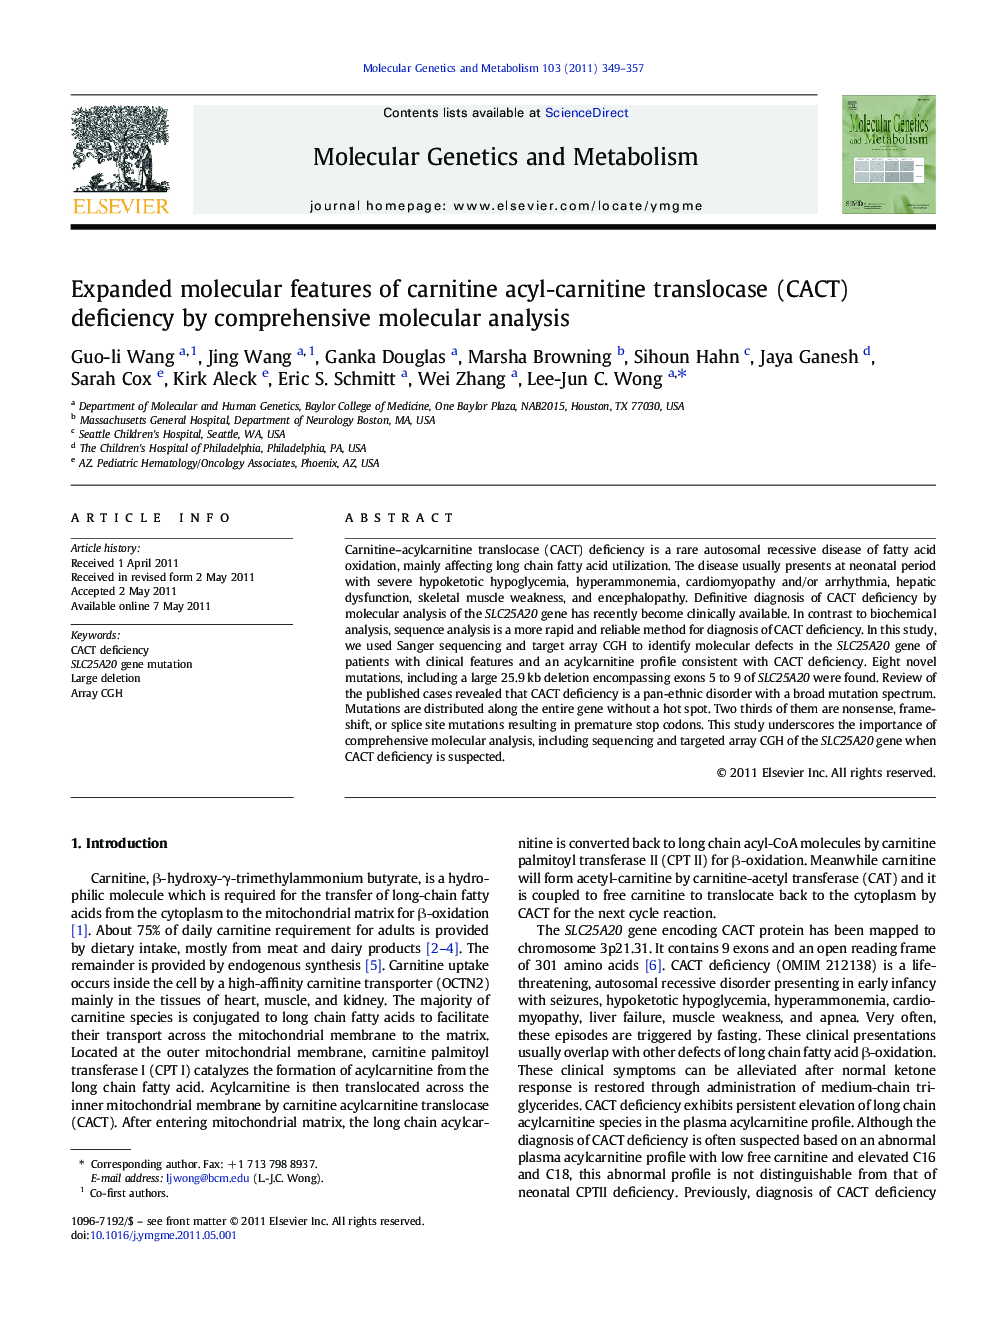 Expanded molecular features of carnitine acyl-carnitine translocase (CACT) deficiency by comprehensive molecular analysis